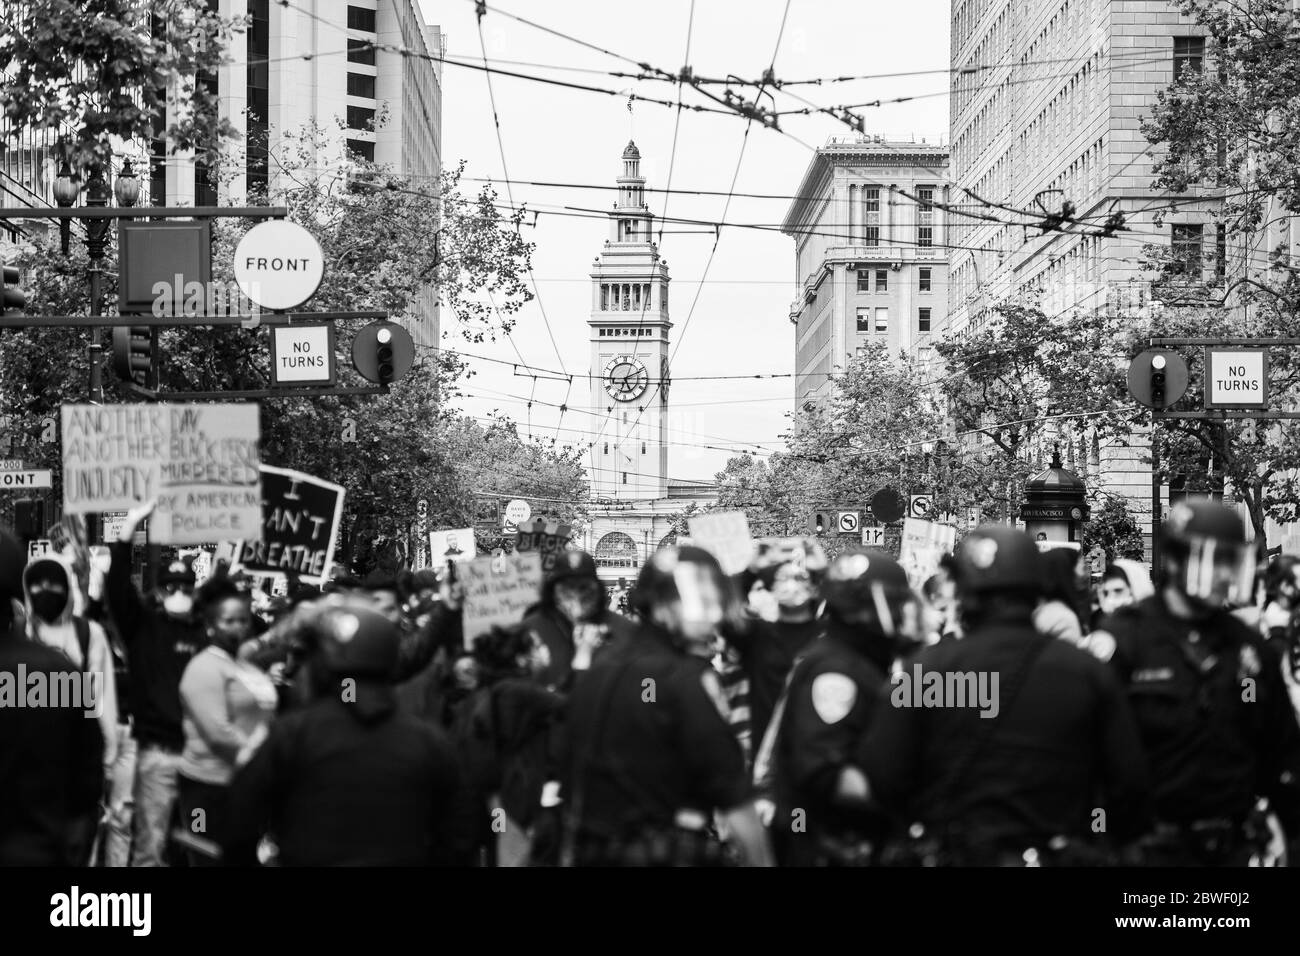 SAN FRANCISCO, CA- MAY 31: Protestors demonstrate on Market Street in San Francisco, California on May 31, 2020 during the protest after the death of George Floyd. Credit:Chris Tuite/ImageSPACE/MediaPunch Stock Photo